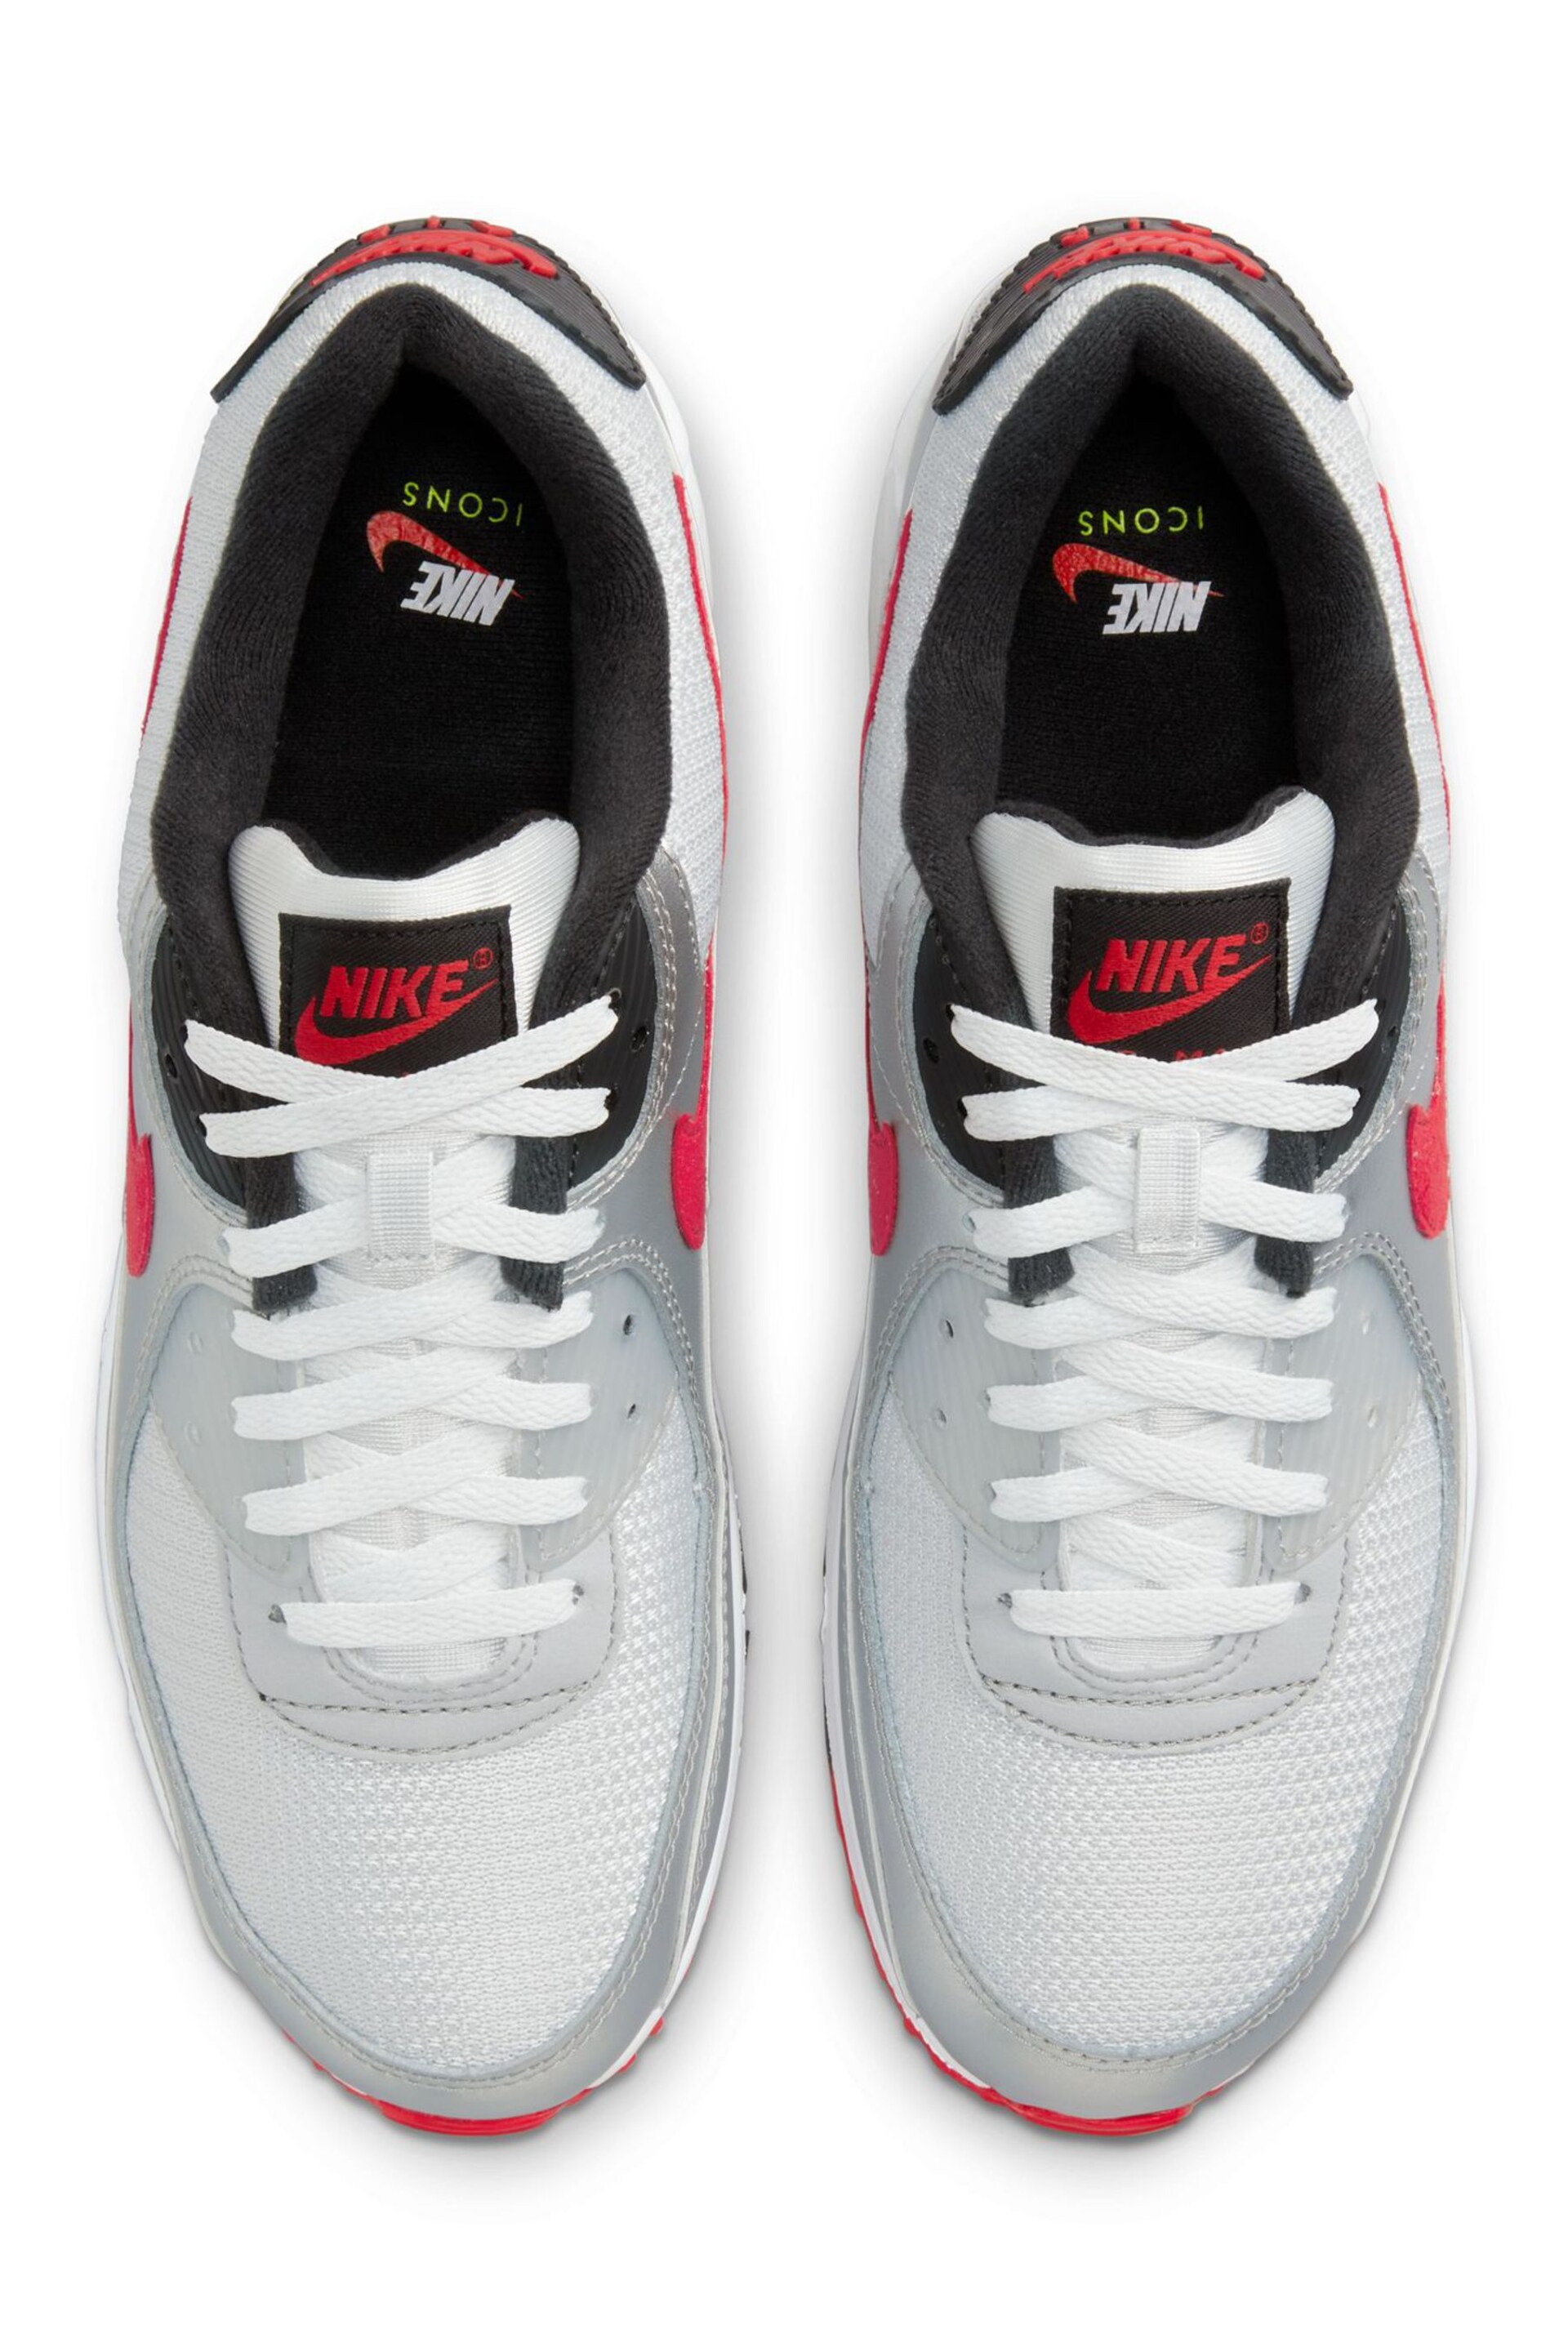 Nike Grey/Red Air Max 90 Trainers - Image 6 of 9